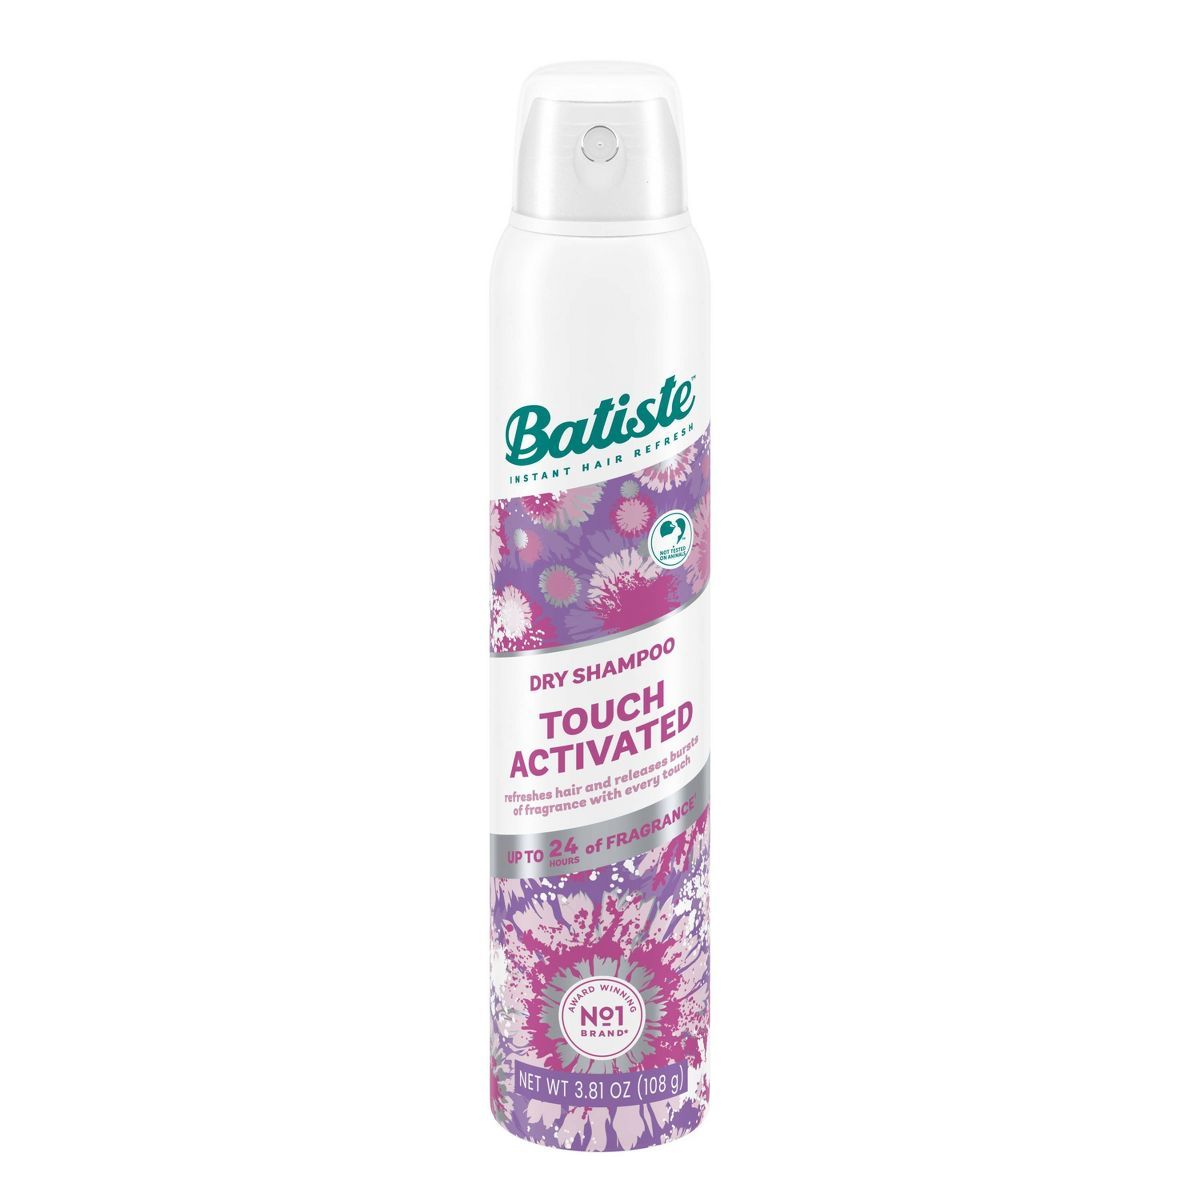 Batiste Touch Activated Dry Shampoo - 3.81oz | Target